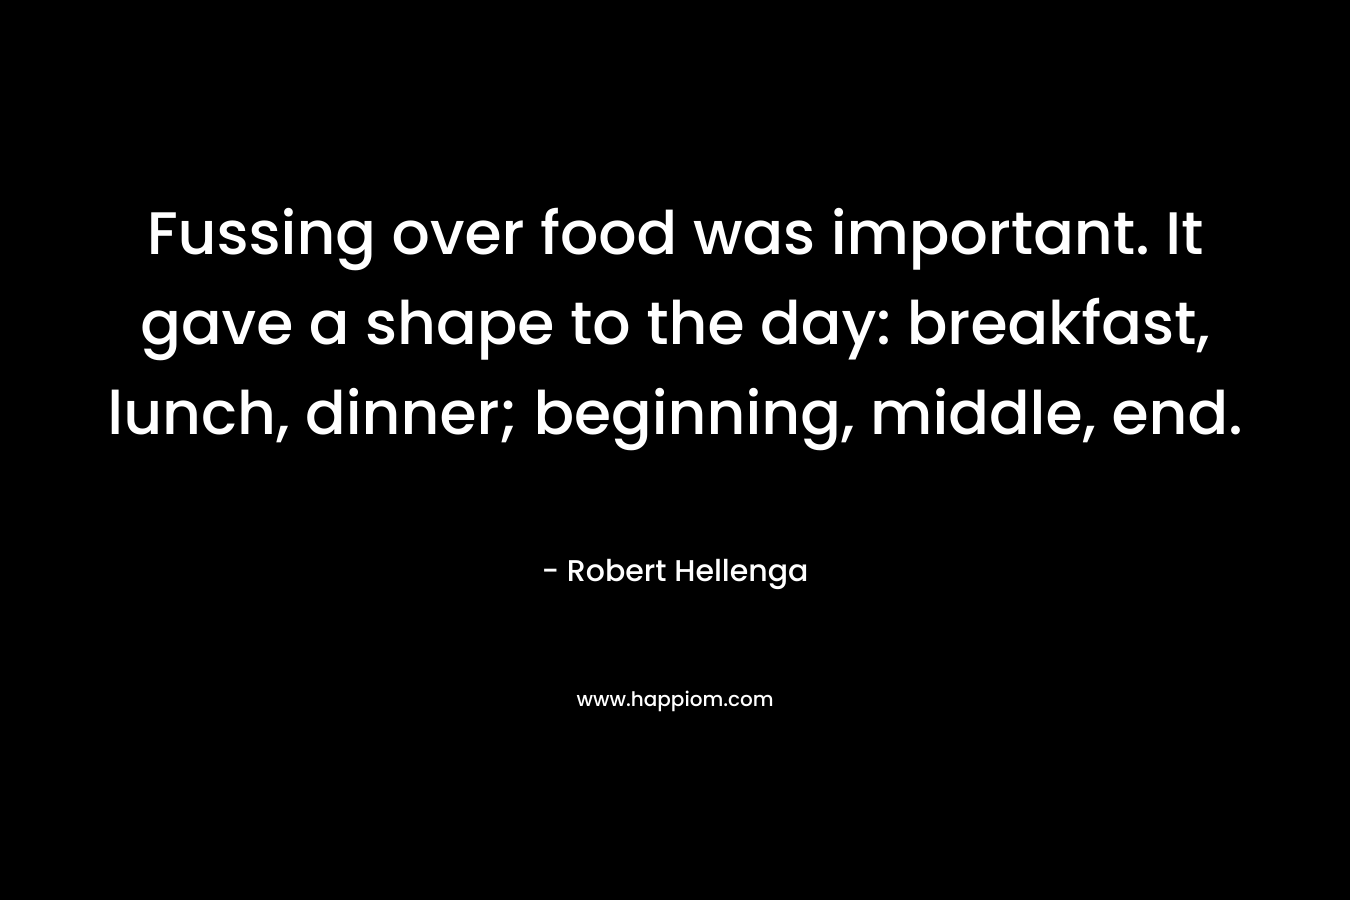 Fussing over food was important. It gave a shape to the day: breakfast, lunch, dinner; beginning, middle, end. – Robert Hellenga